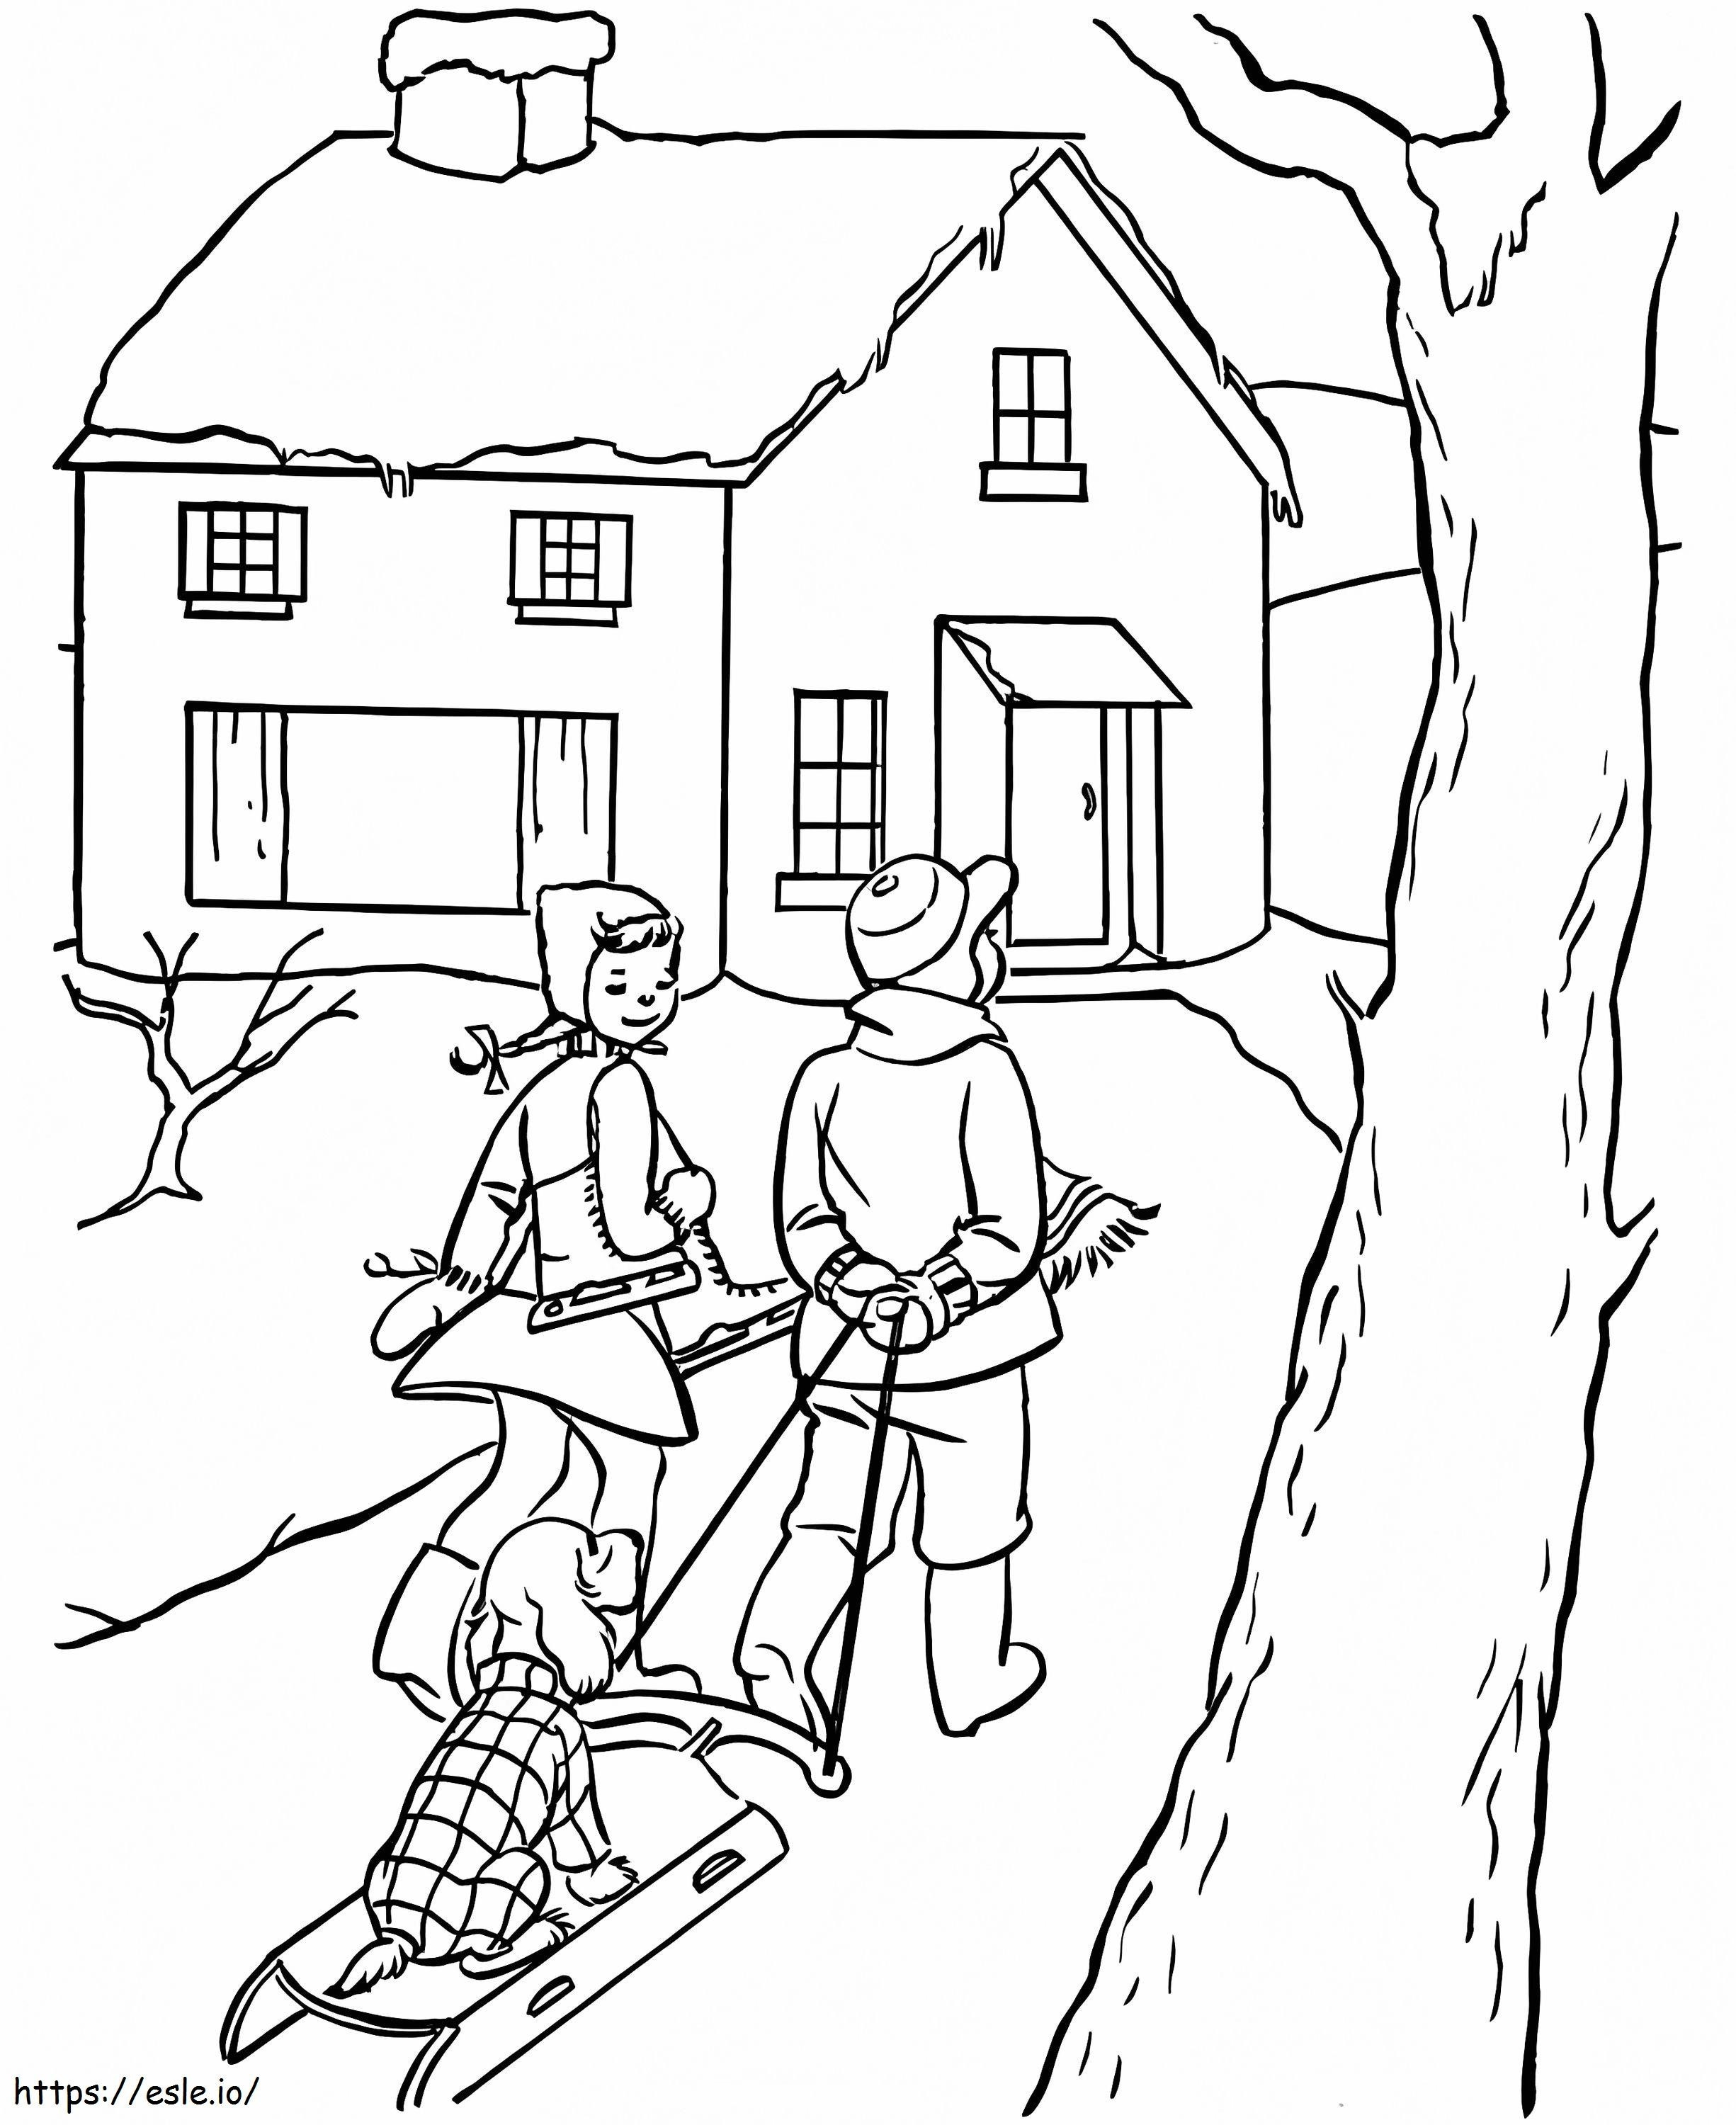 Kids And House coloring page